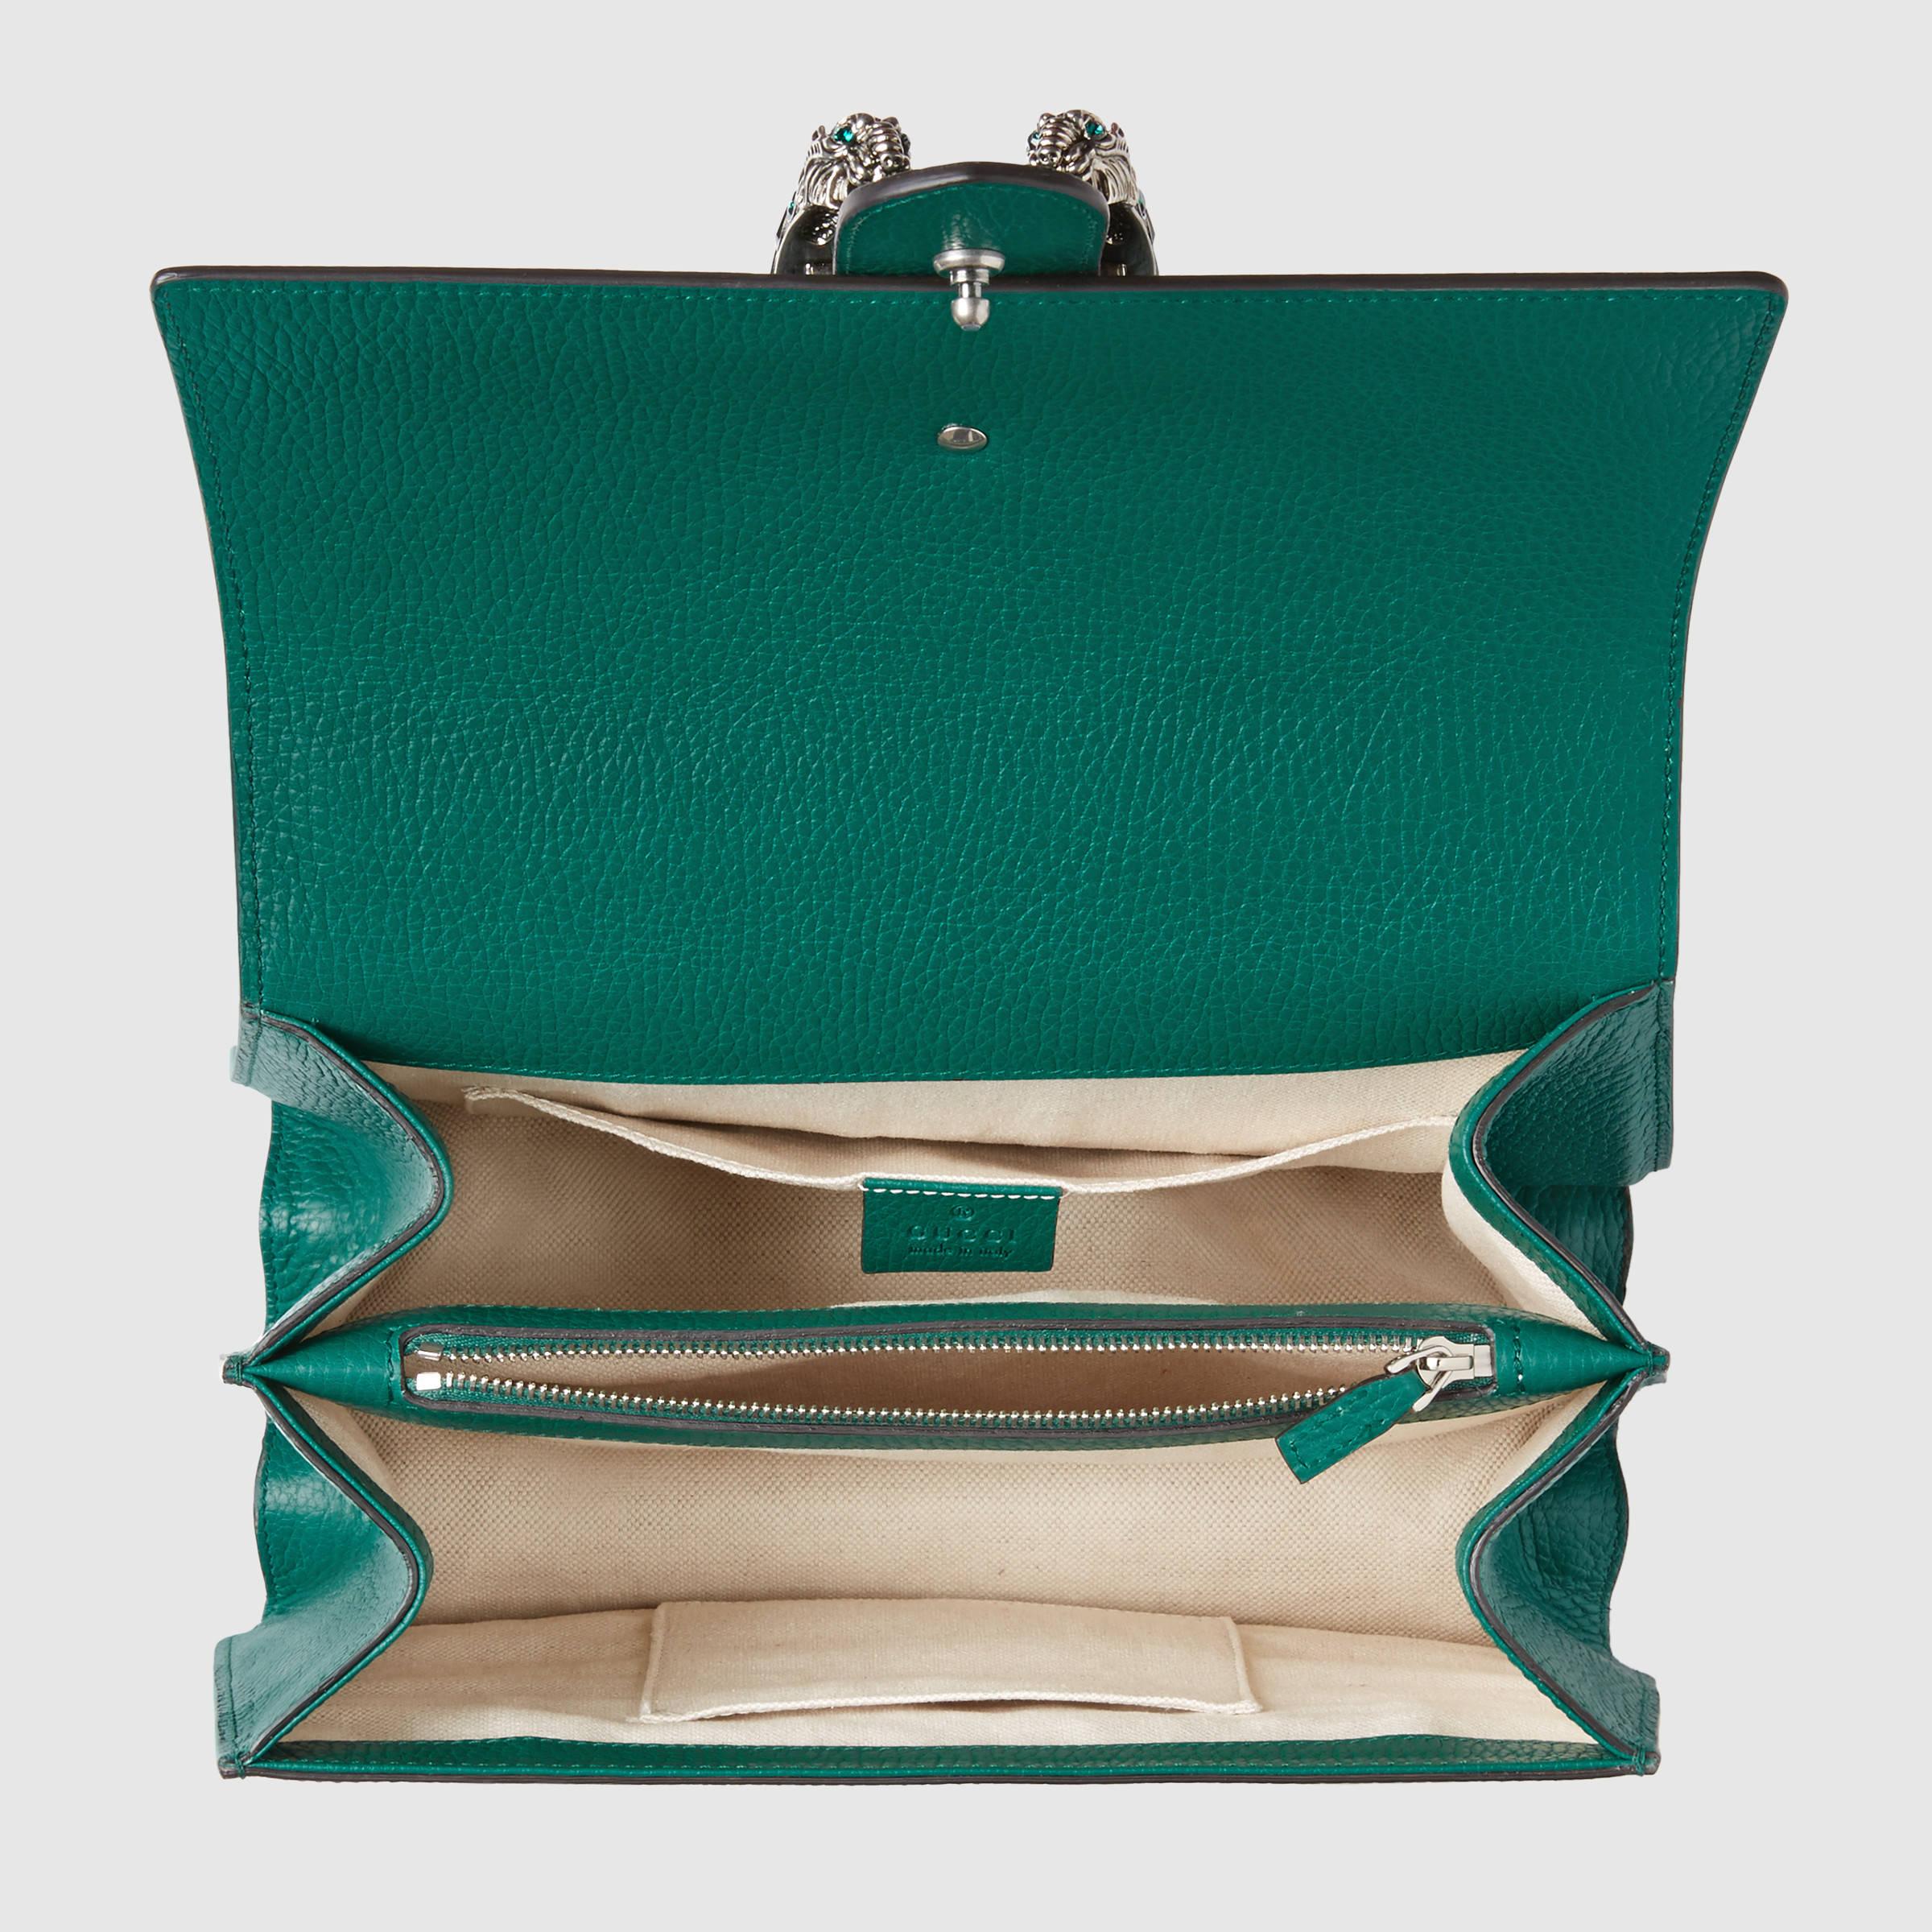 Lyst - Gucci Dionysus Leather Top Handle Bag in Green